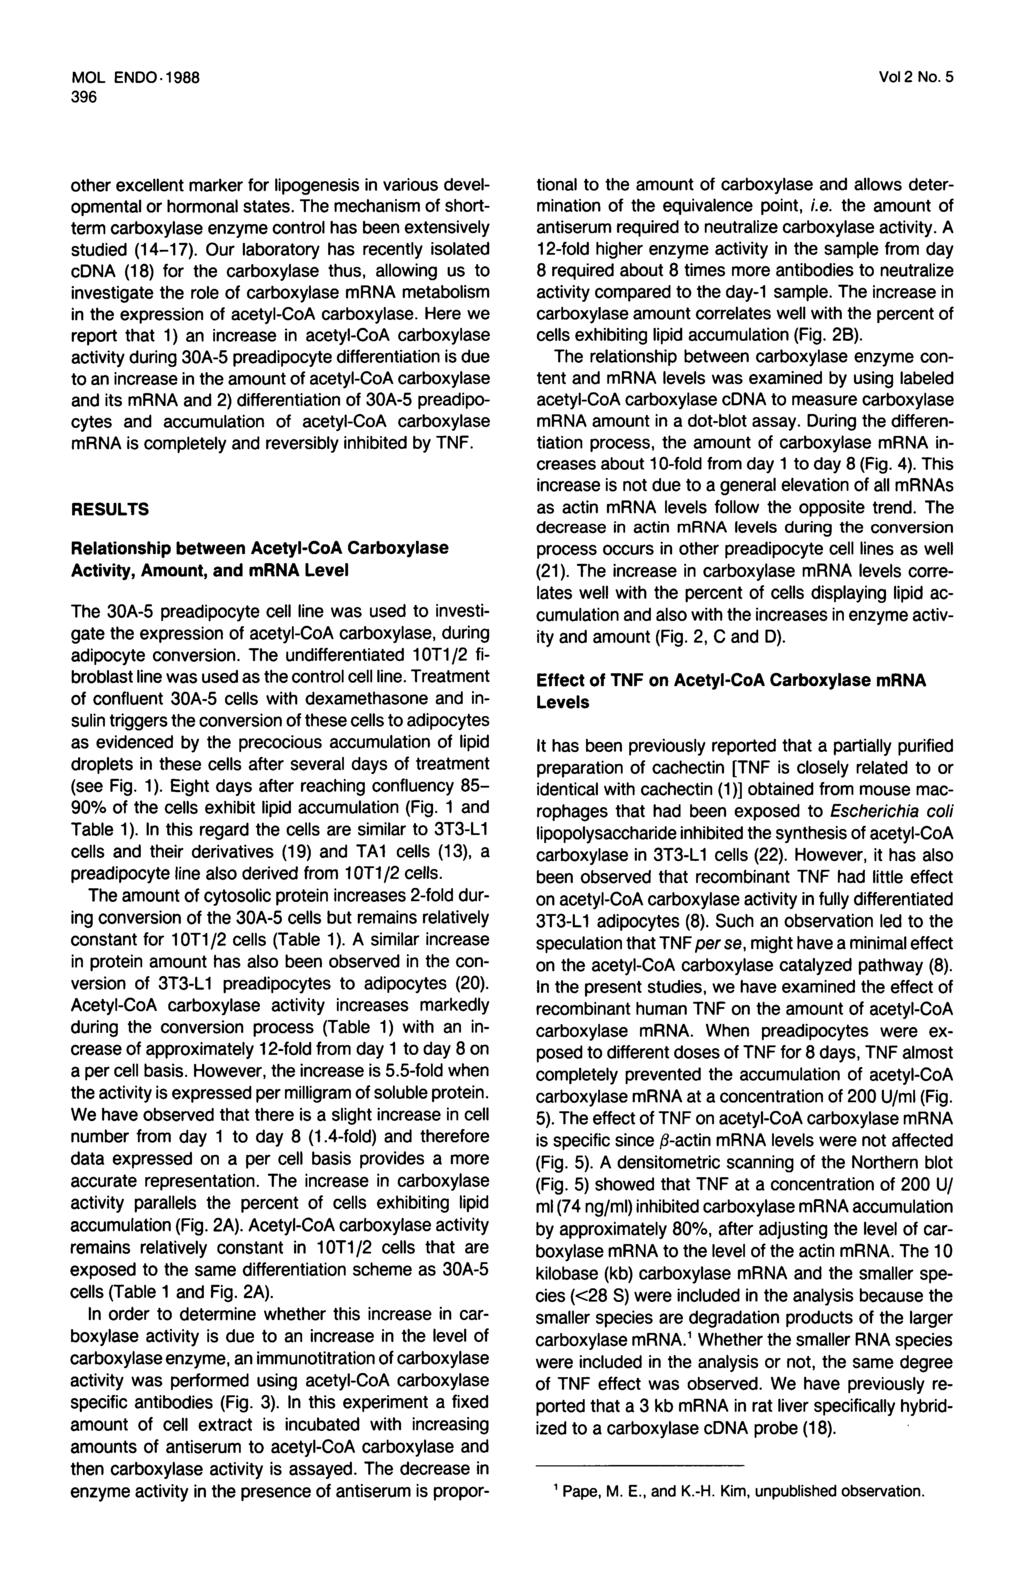 MOL ENDO1988 396 Vol 2 No. 5 other excellent marker for lpogeness n varous developmental or hormonal states. The mechansm of shortterm carboxylase enzyme control has been extensvely studed (1417).